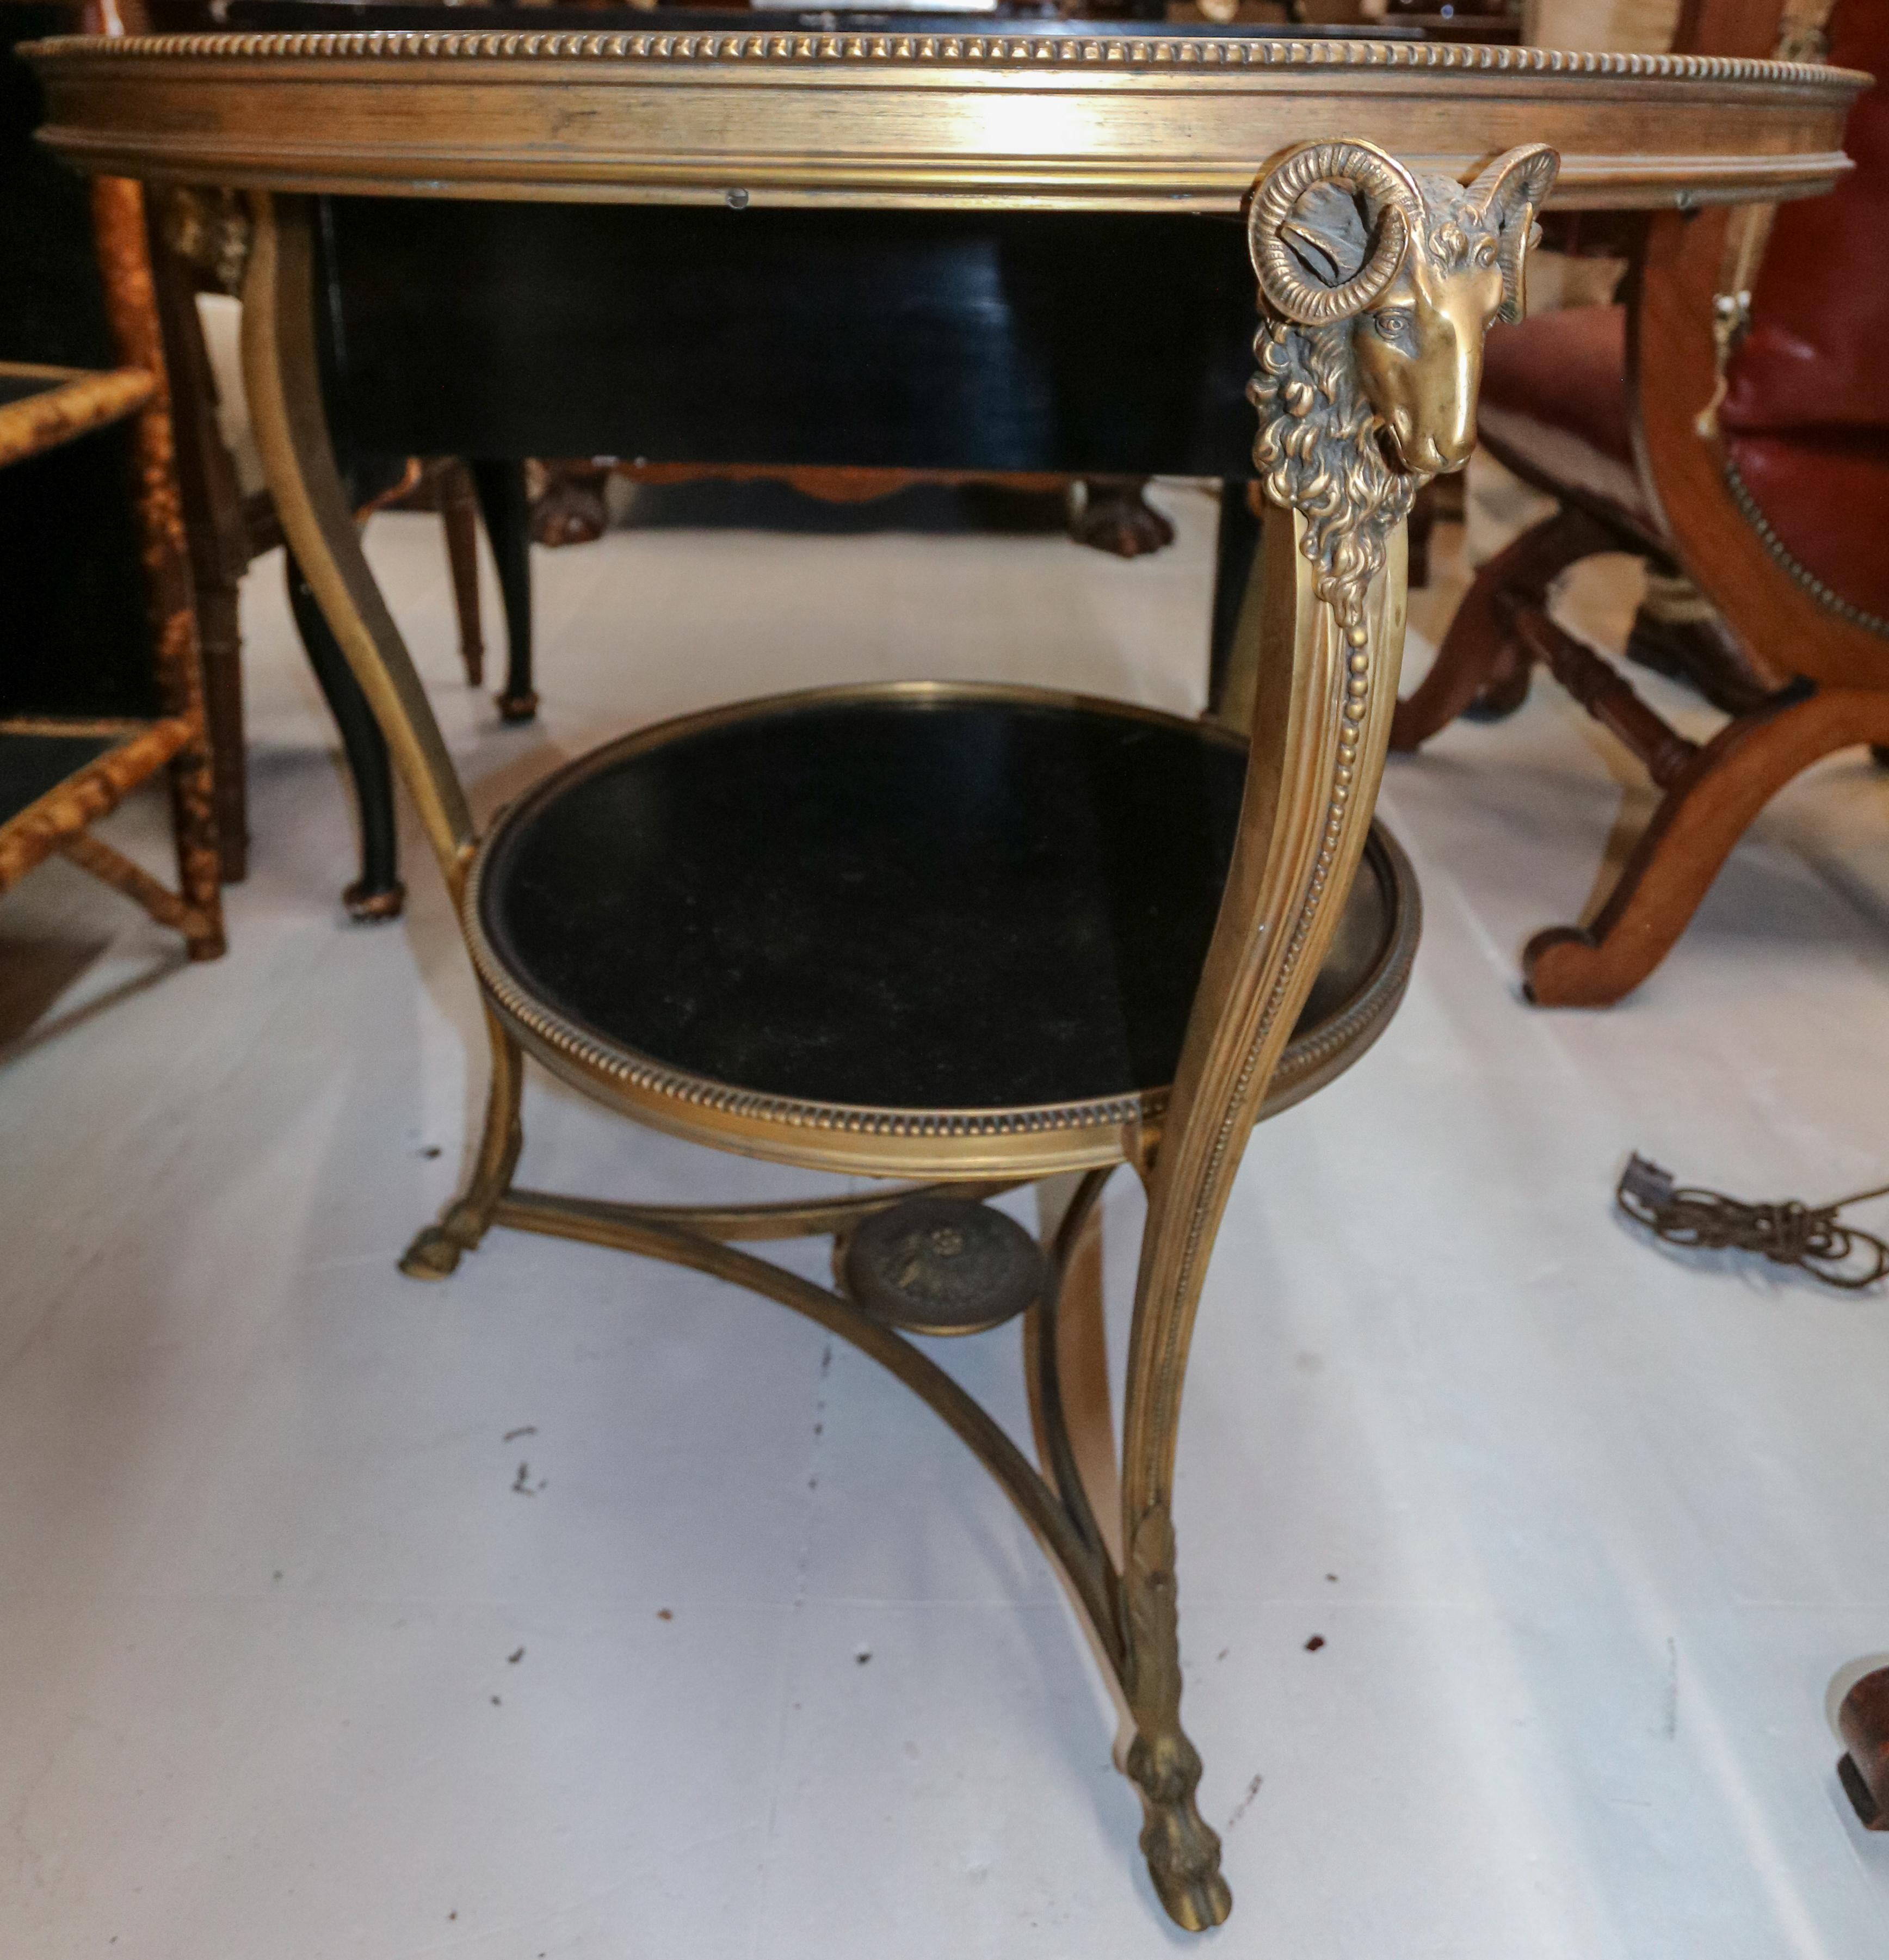 Gilt 1920s French Gueridon Side Table with Ram's Head Details and Marble Top